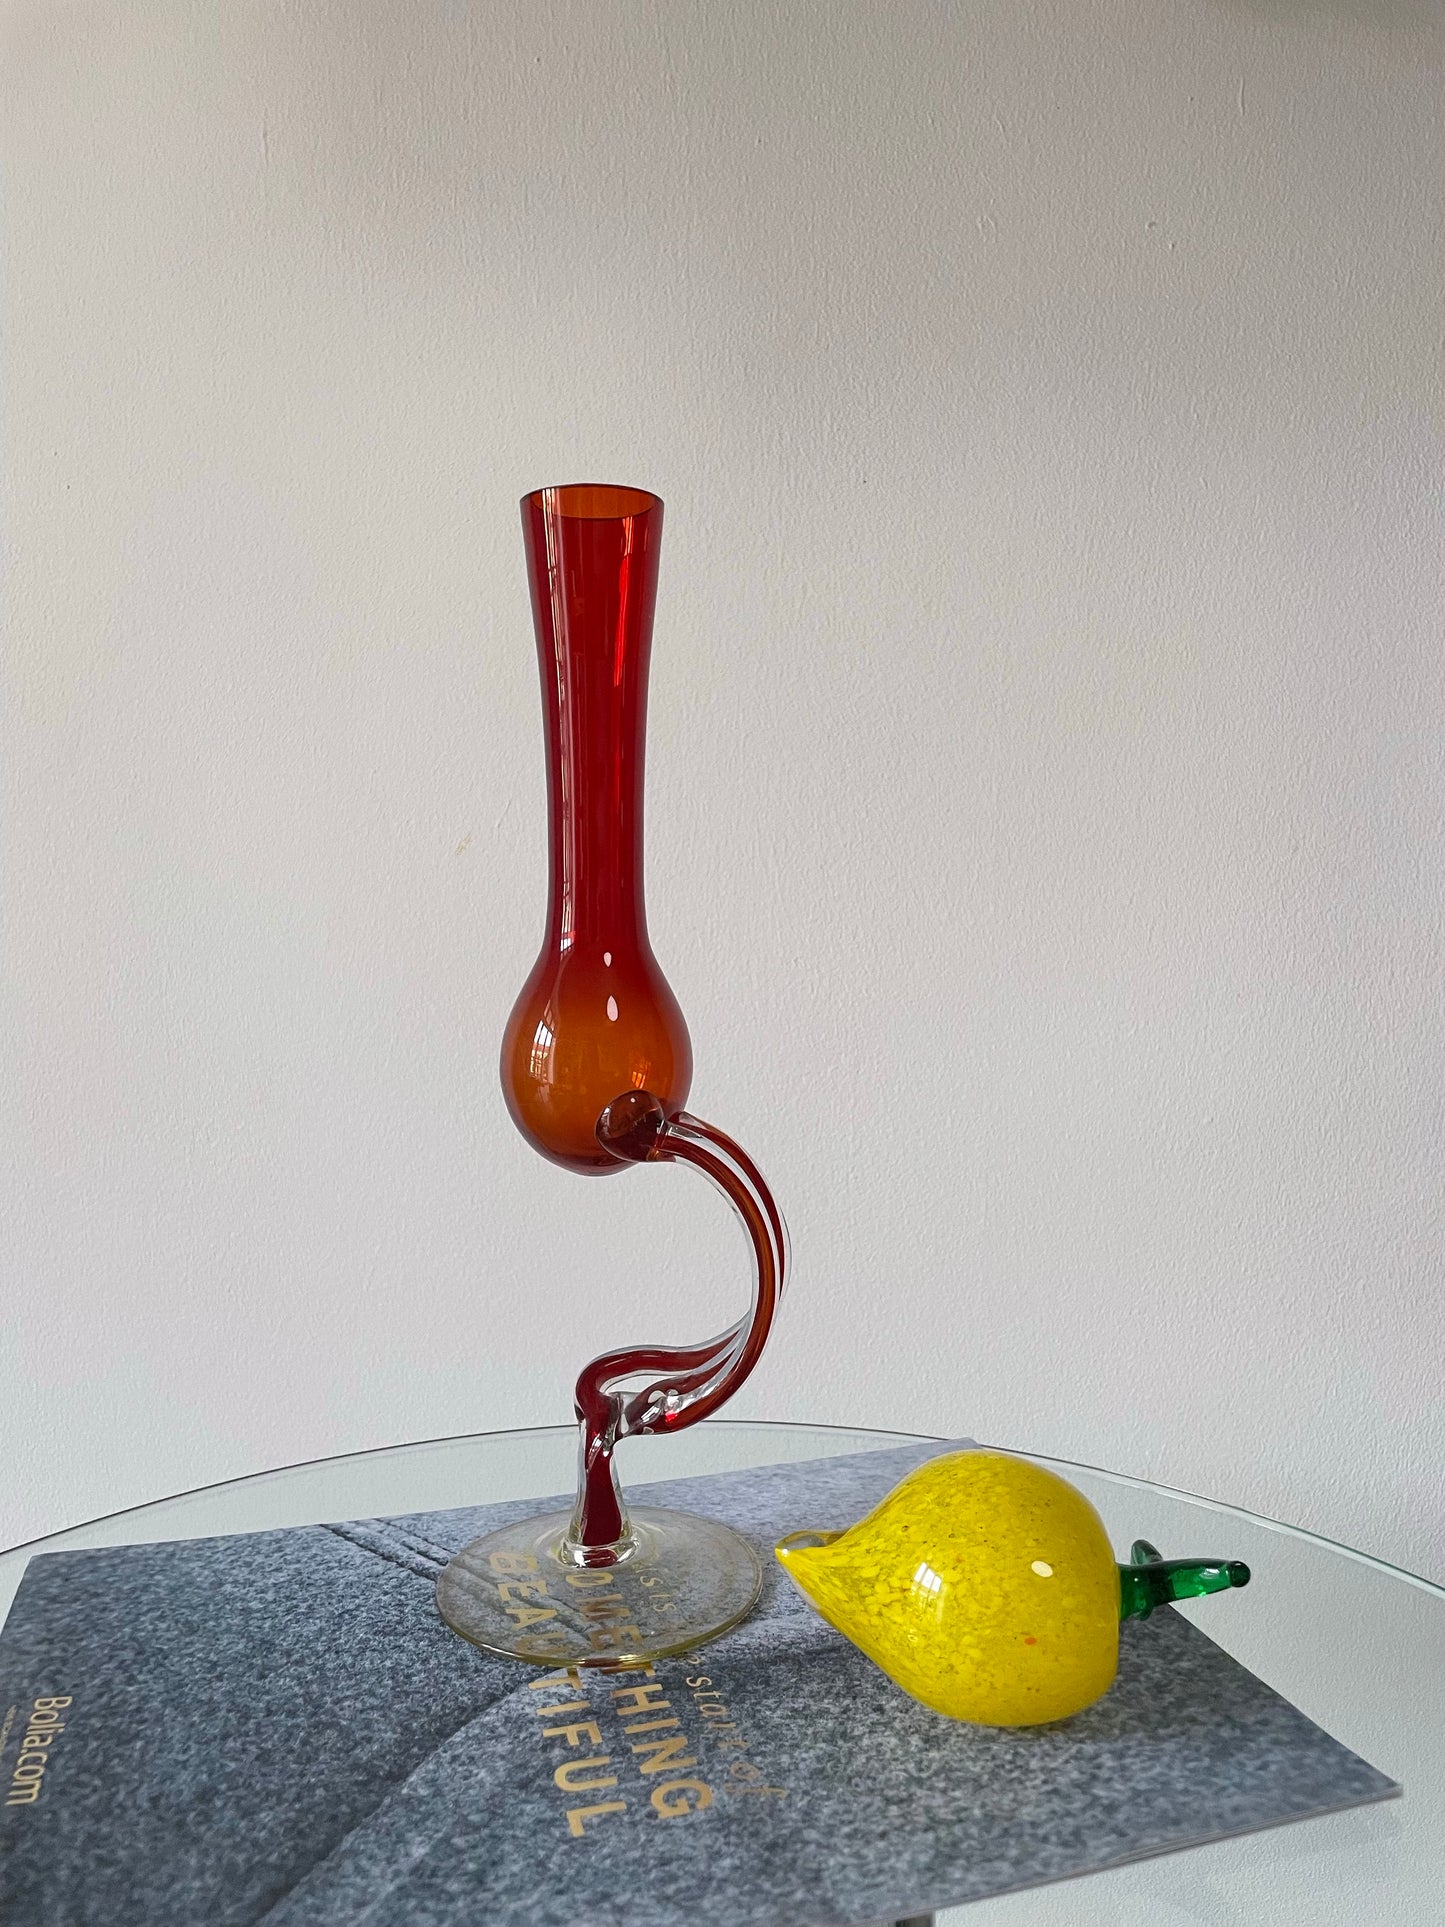 Quirky flask vase